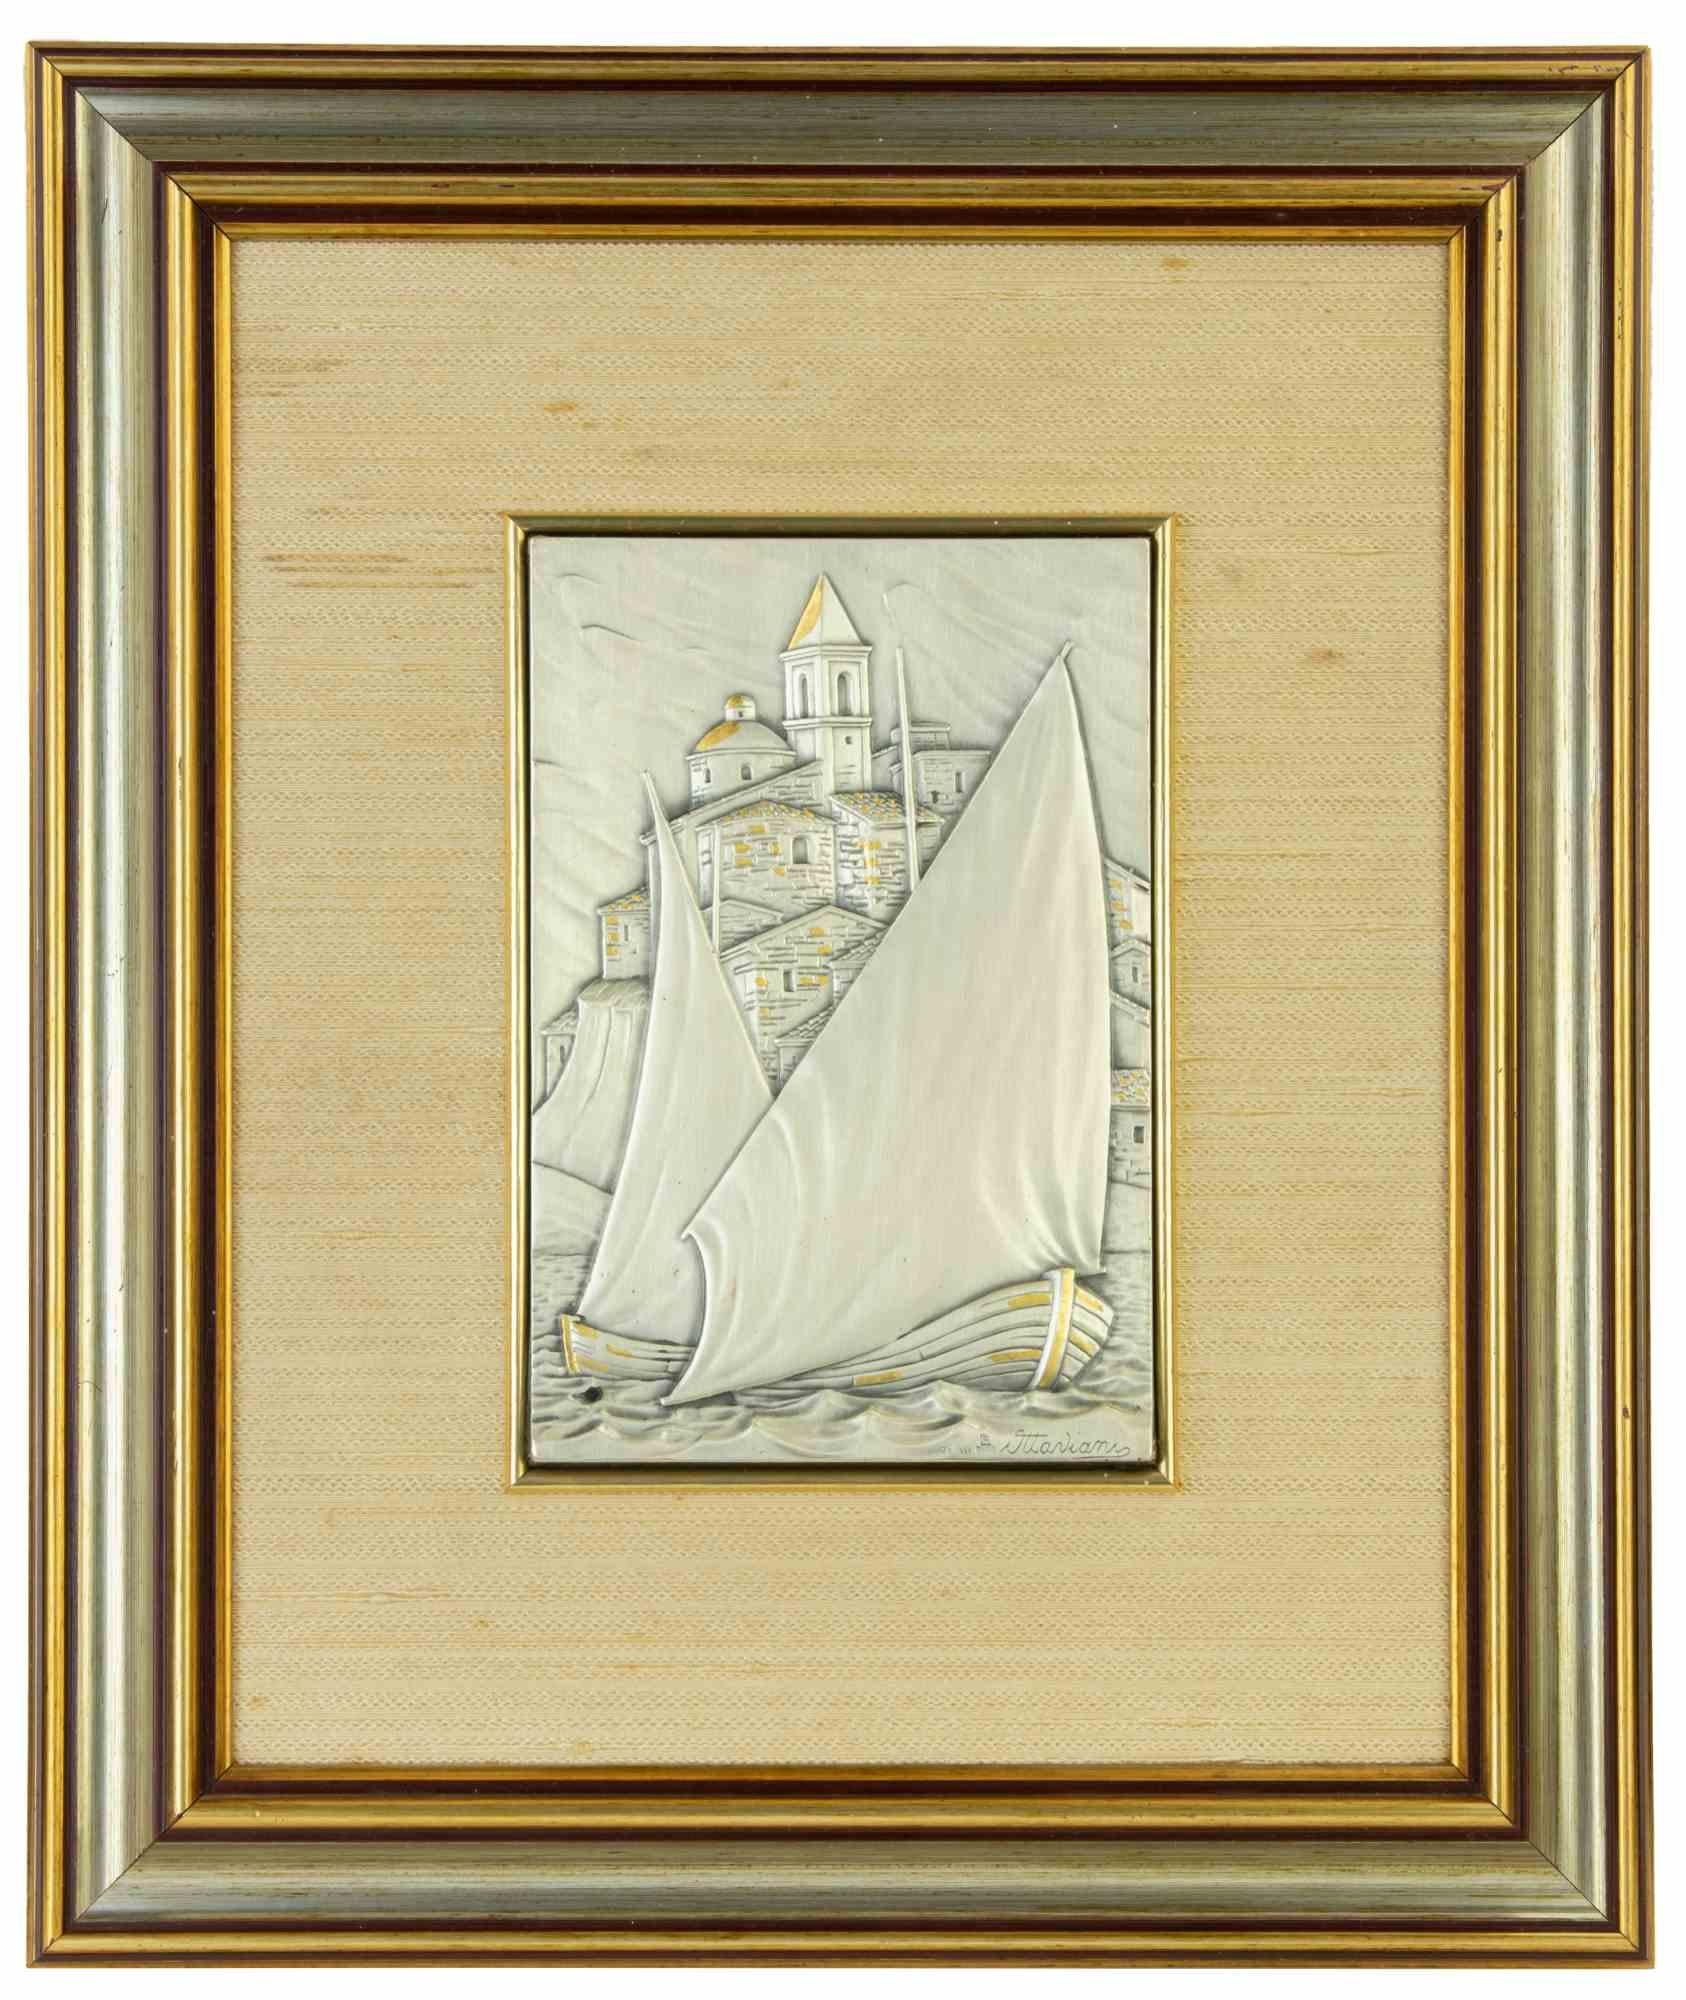 Sailing from the Port is an artwork realized by Studio Ottaviani, 1980s.

Sterling Silver Sculpture.

Stamp Silver 925 lower left. Framed. 

17 x 12 cm; 34.5 x 29 cm with frame. 

Good conditions